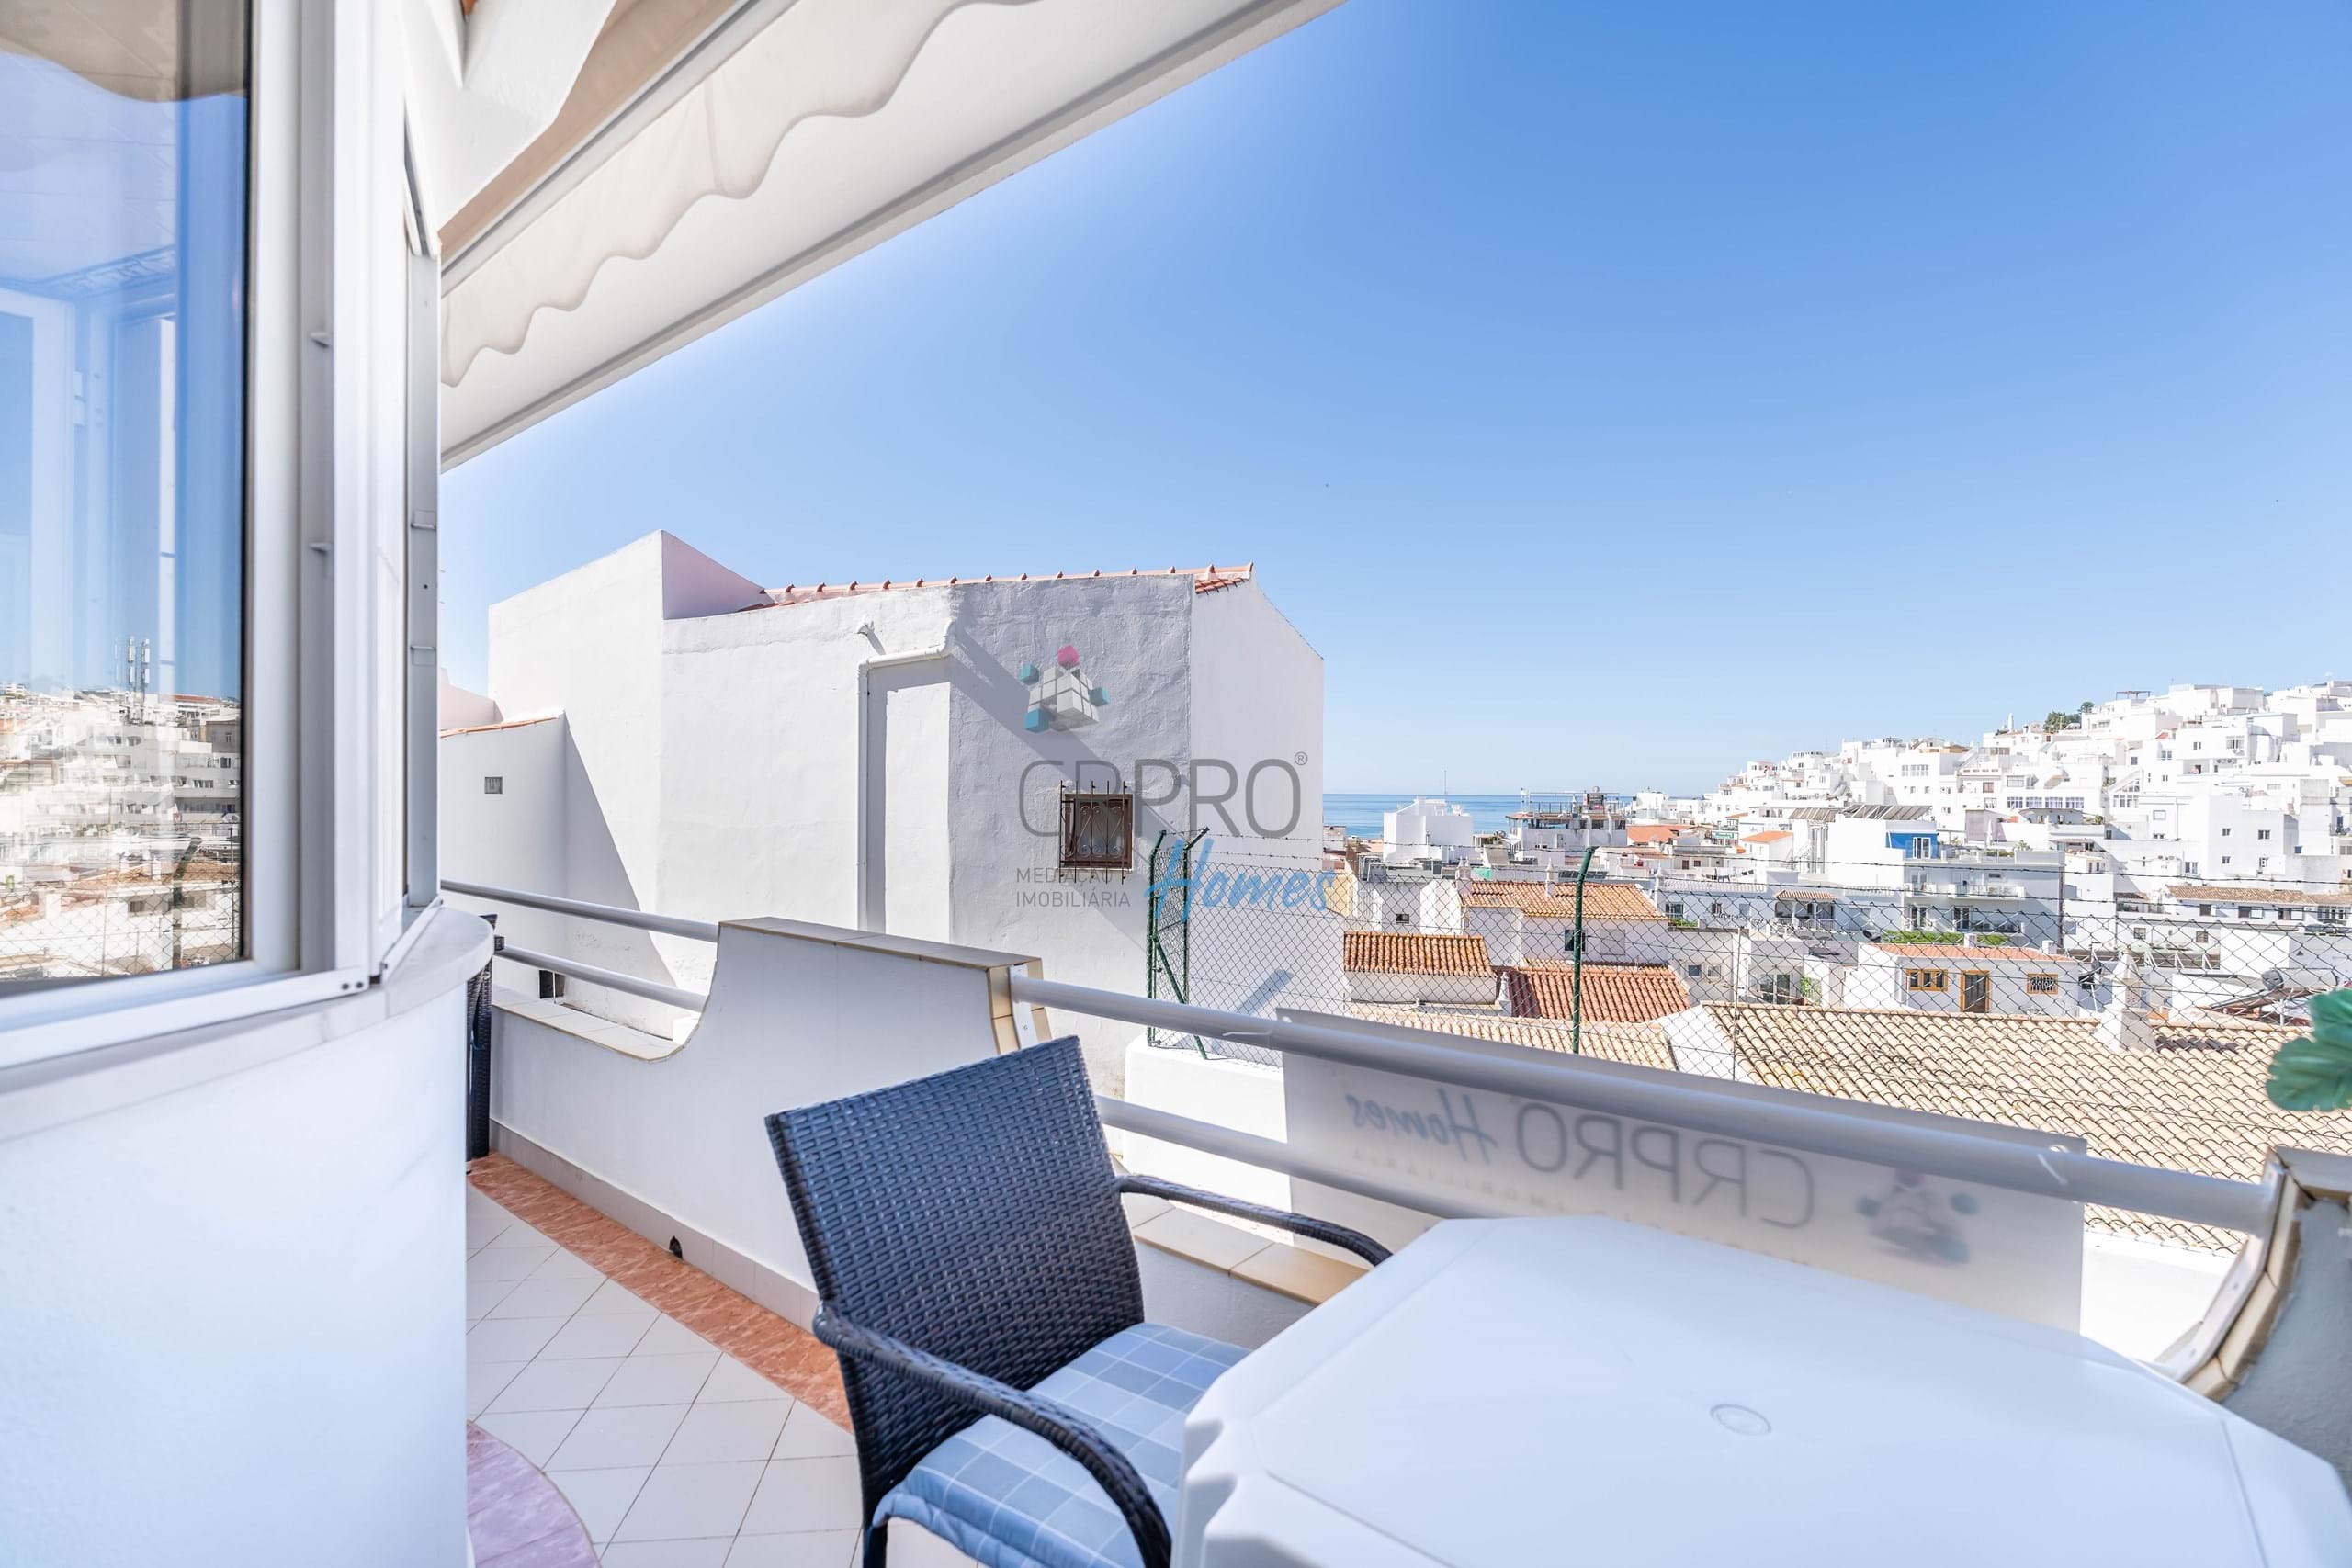 1+1 bedroom apartment in the center of Albufeira with parking space and storage room.